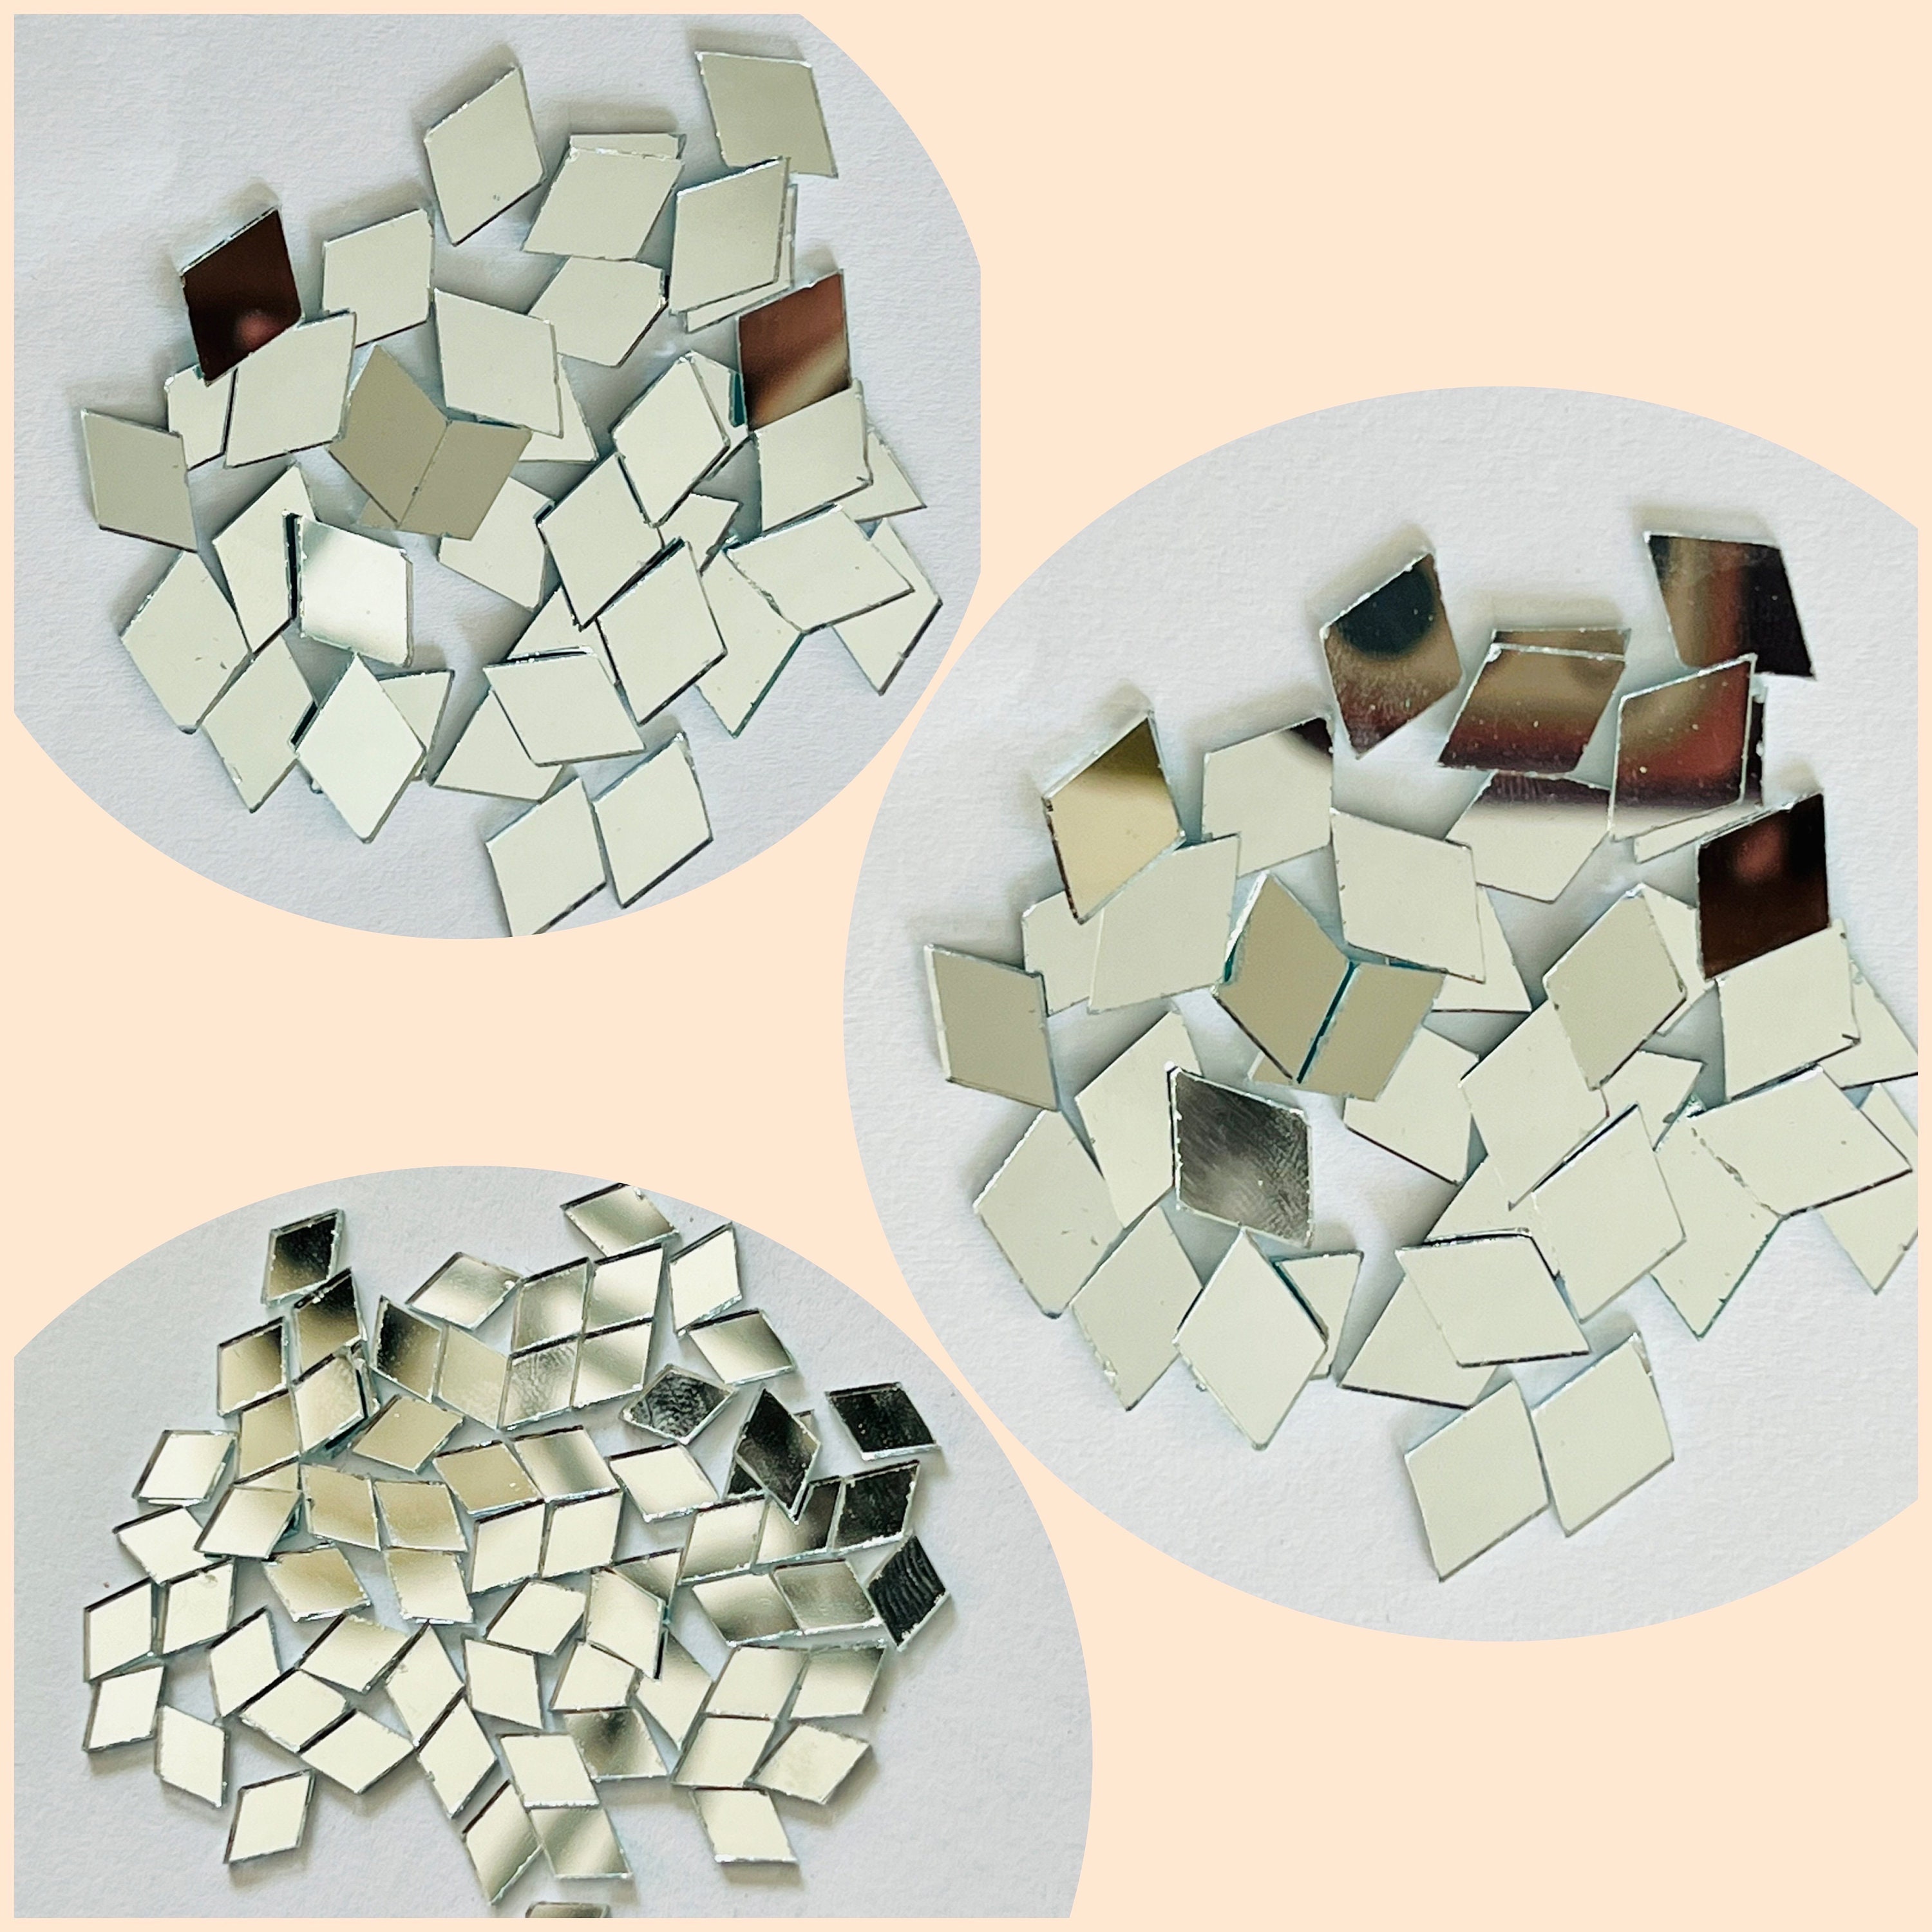 Mirror Glass pieces for Mosaic or Art Craft - 8 oz